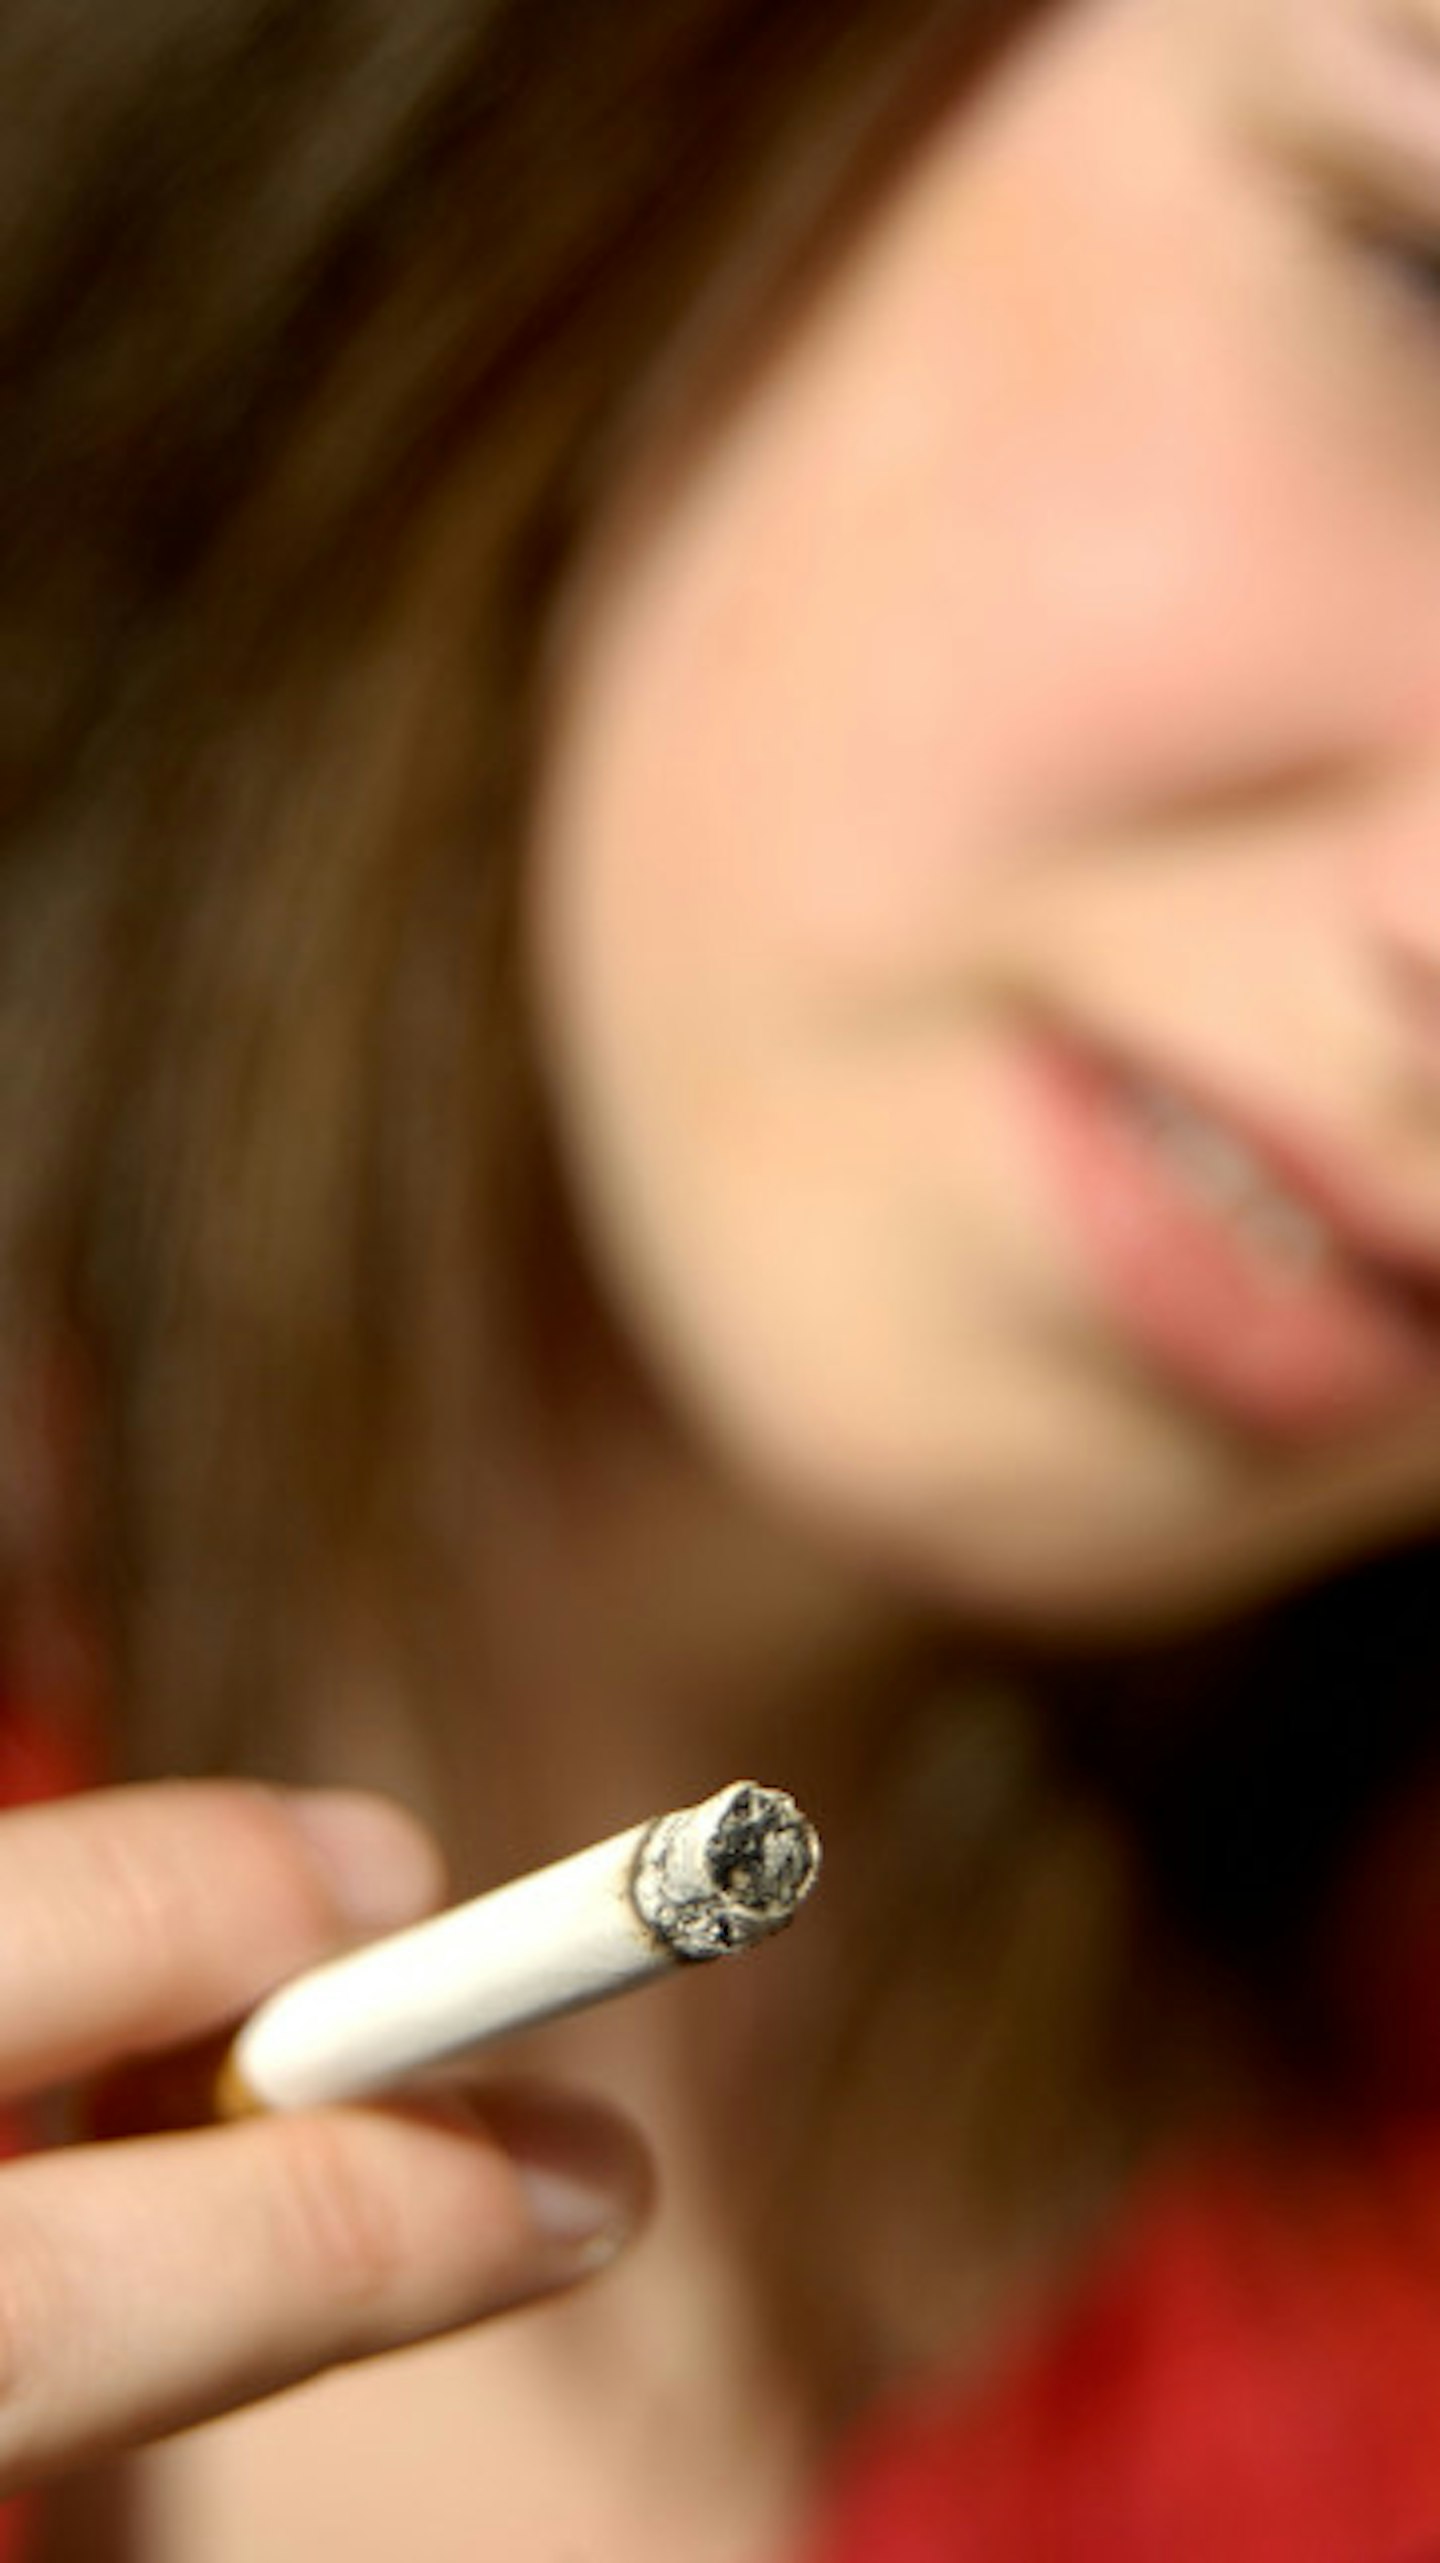 Mason's school has a strict no smoking policy (stock image)